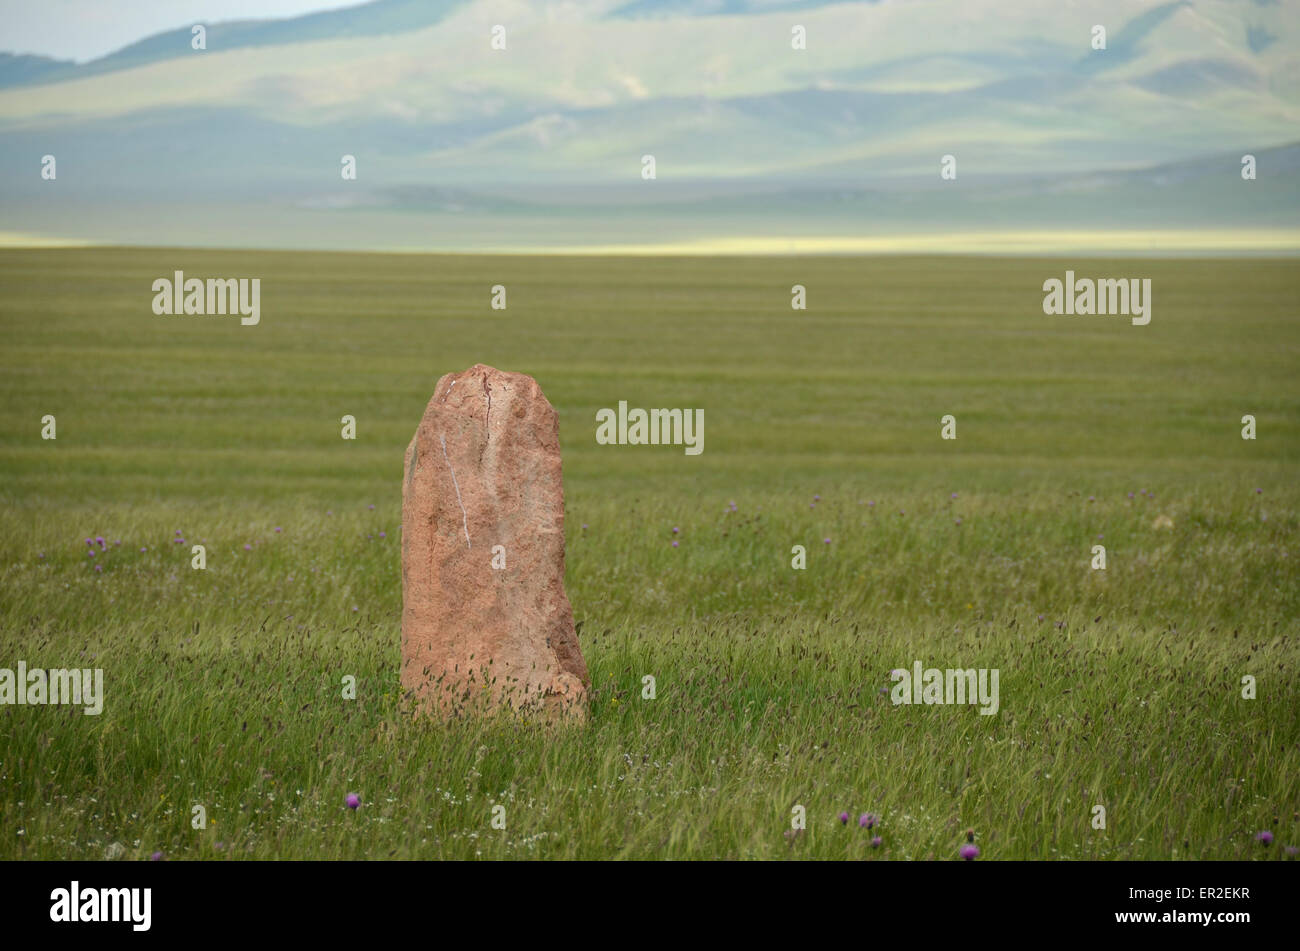 A deer stone in the Ovsgol province, northern Mongolia. Stock Photo